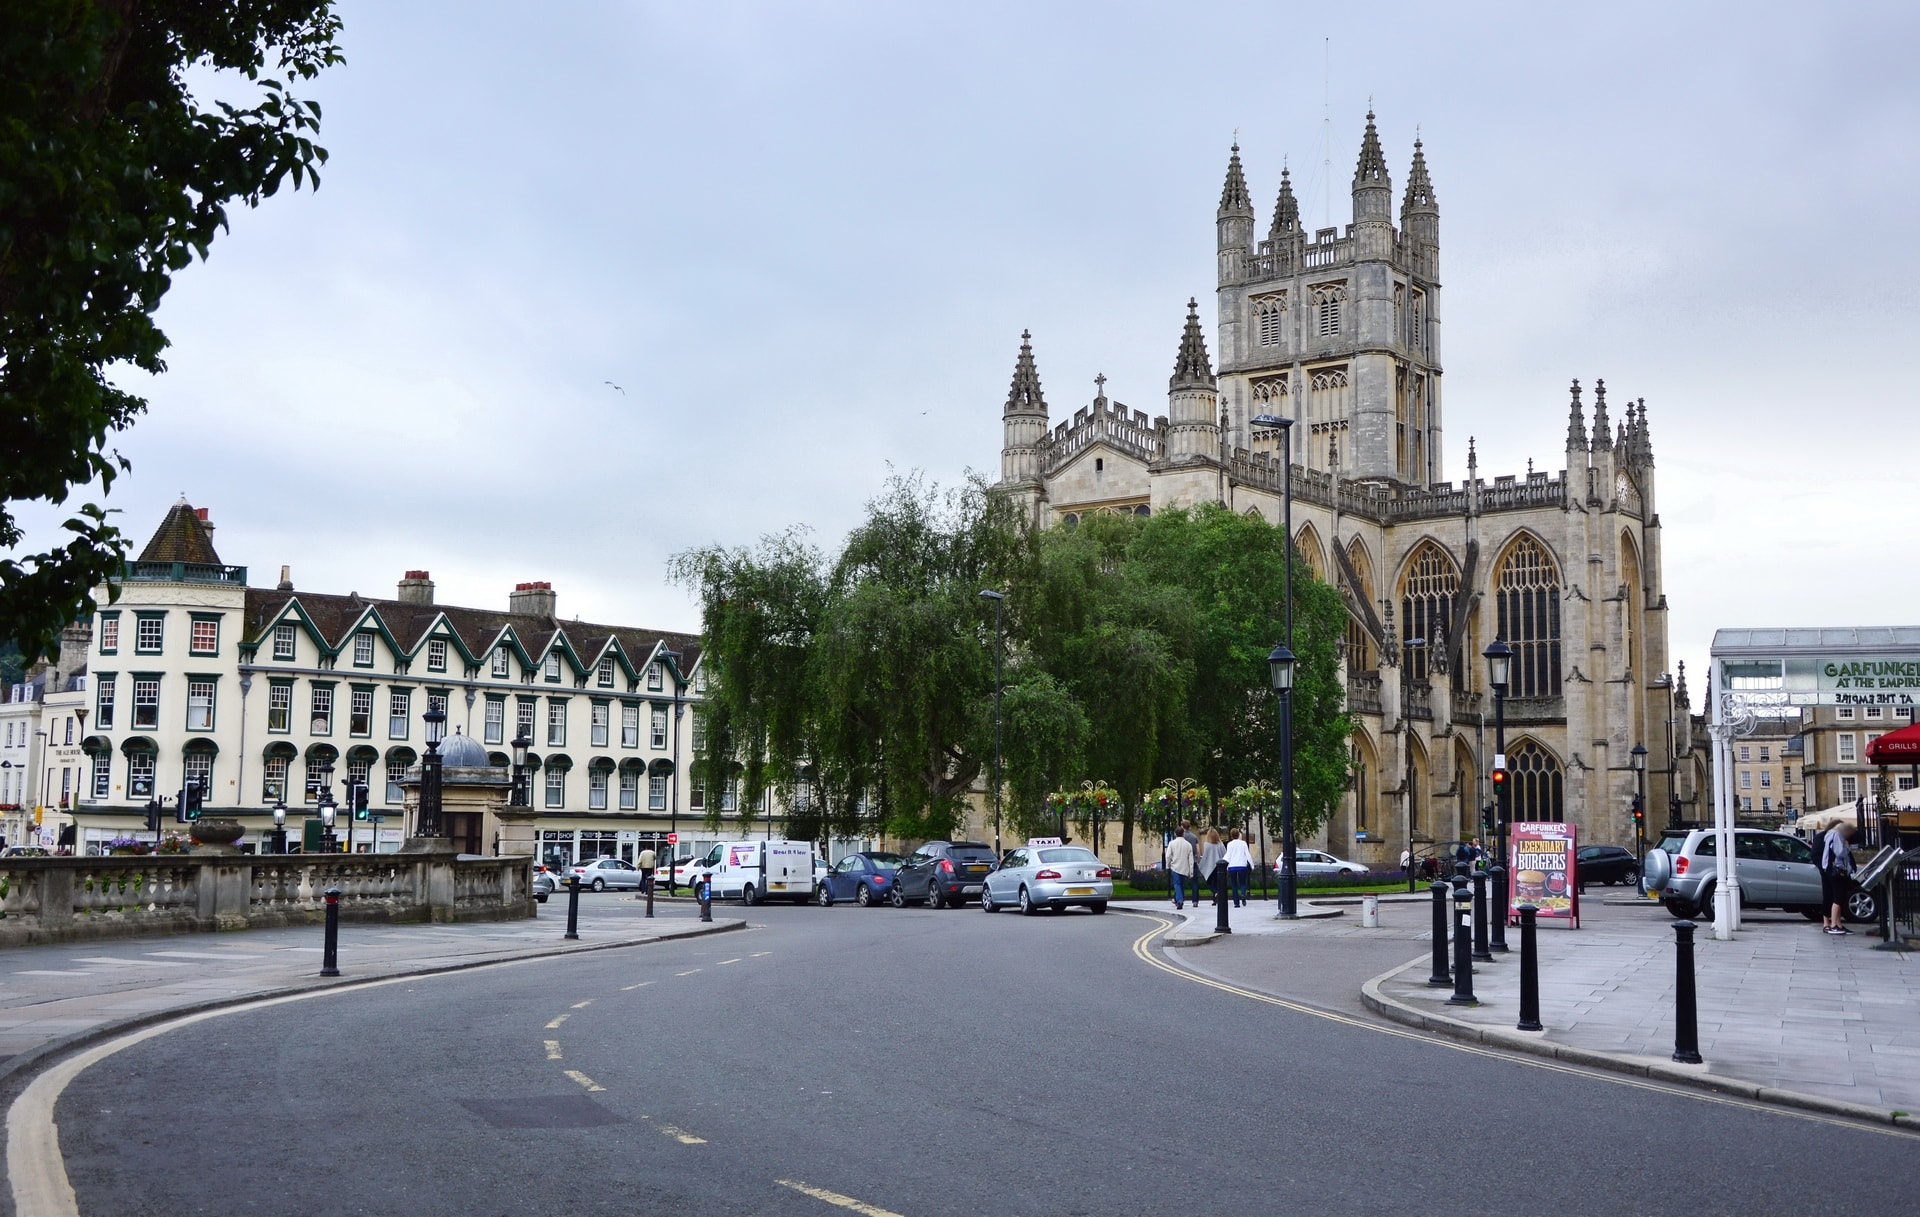 Bath Abbey, looking from Grand Parade street